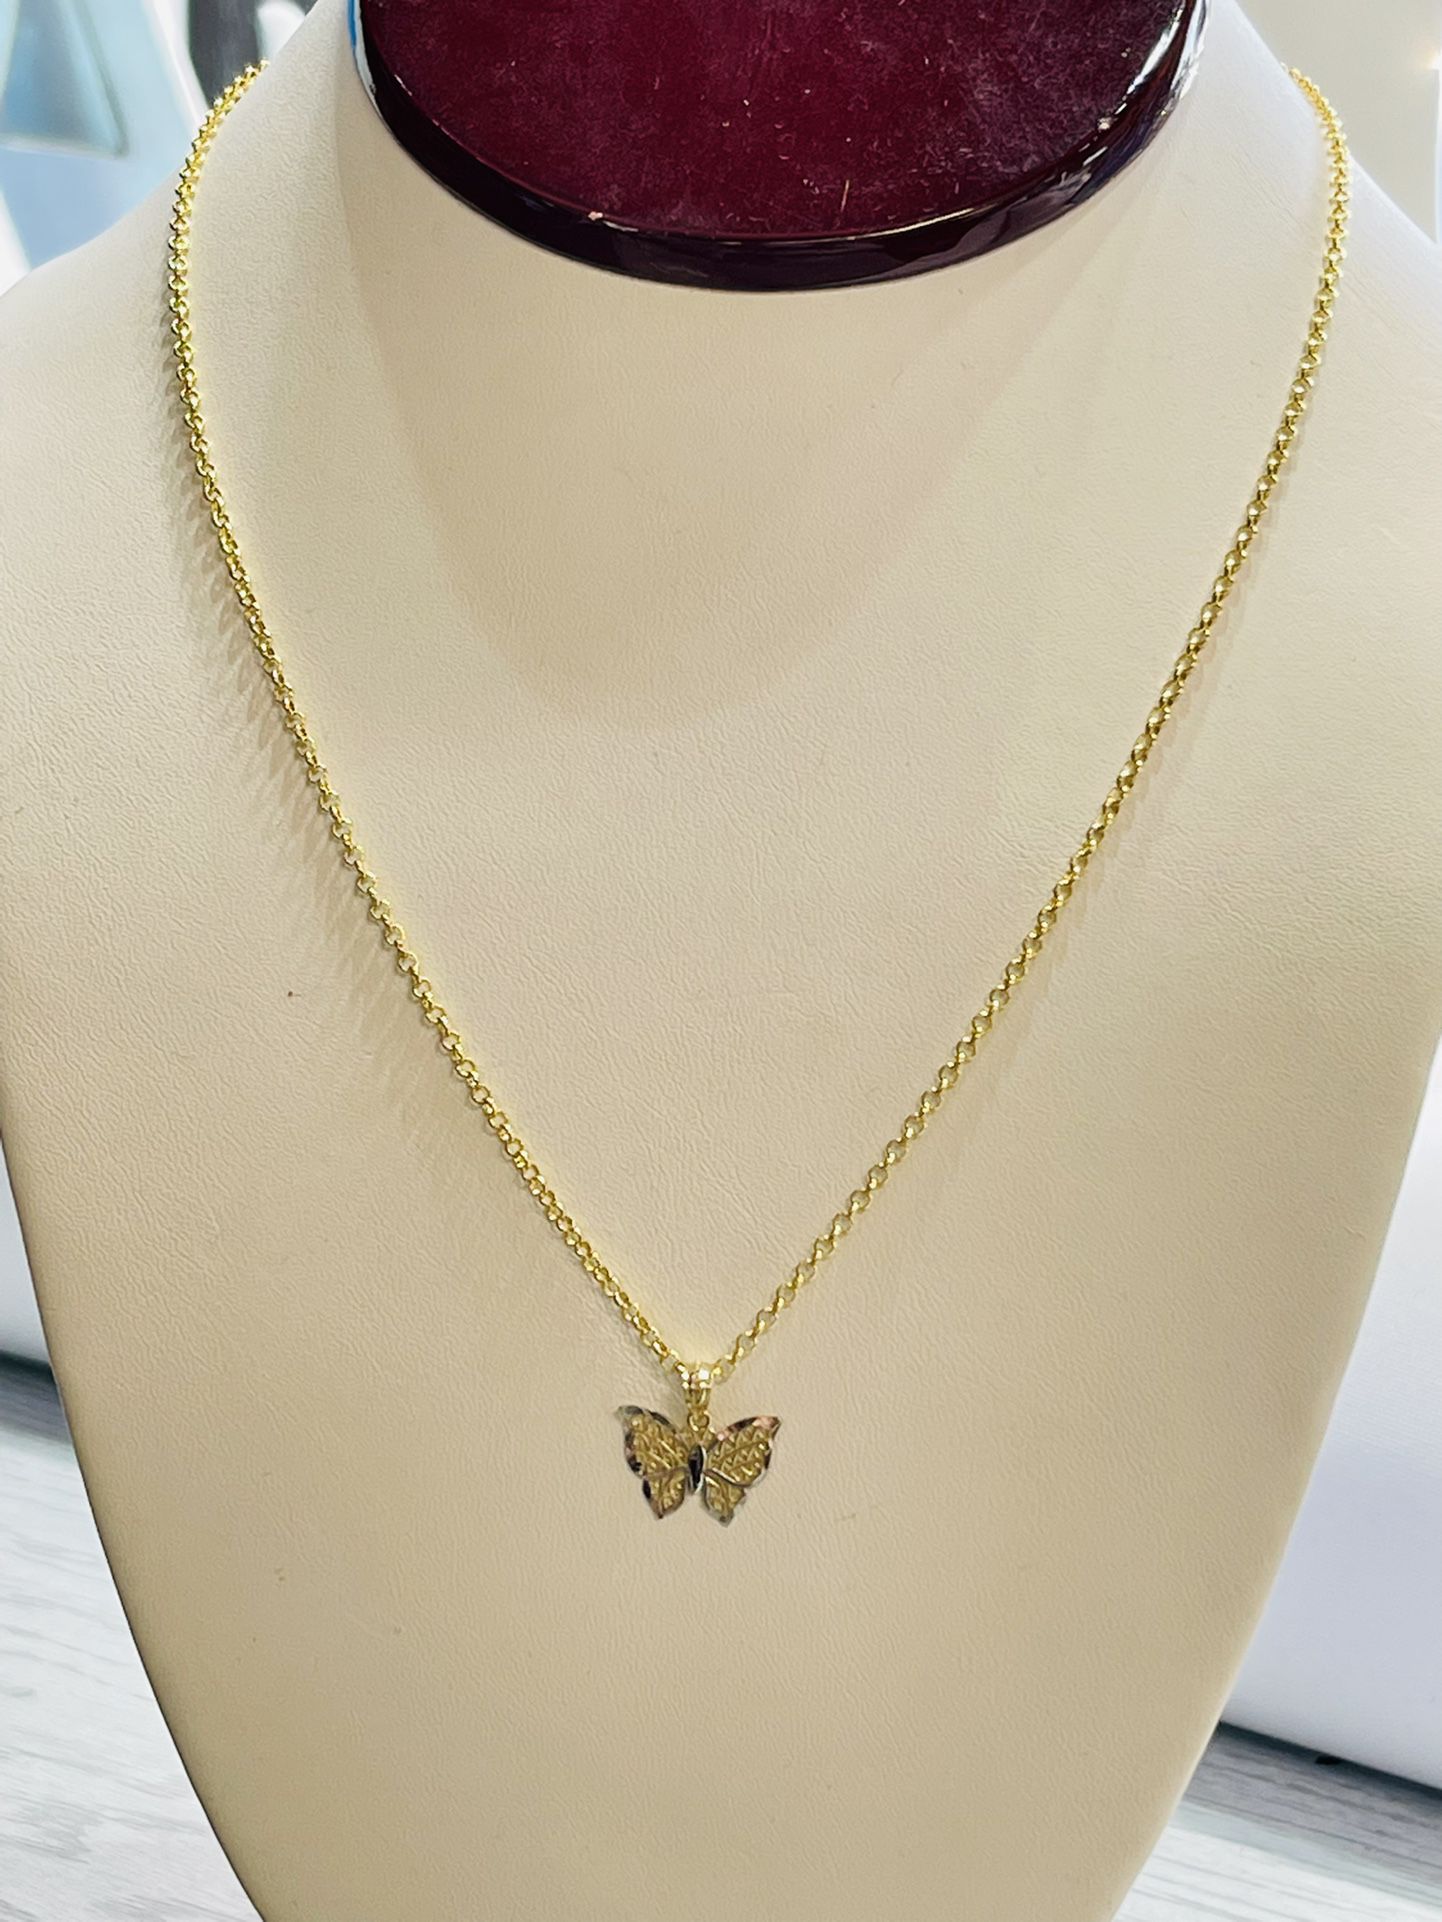 Necklace Yellow Gold 14kt